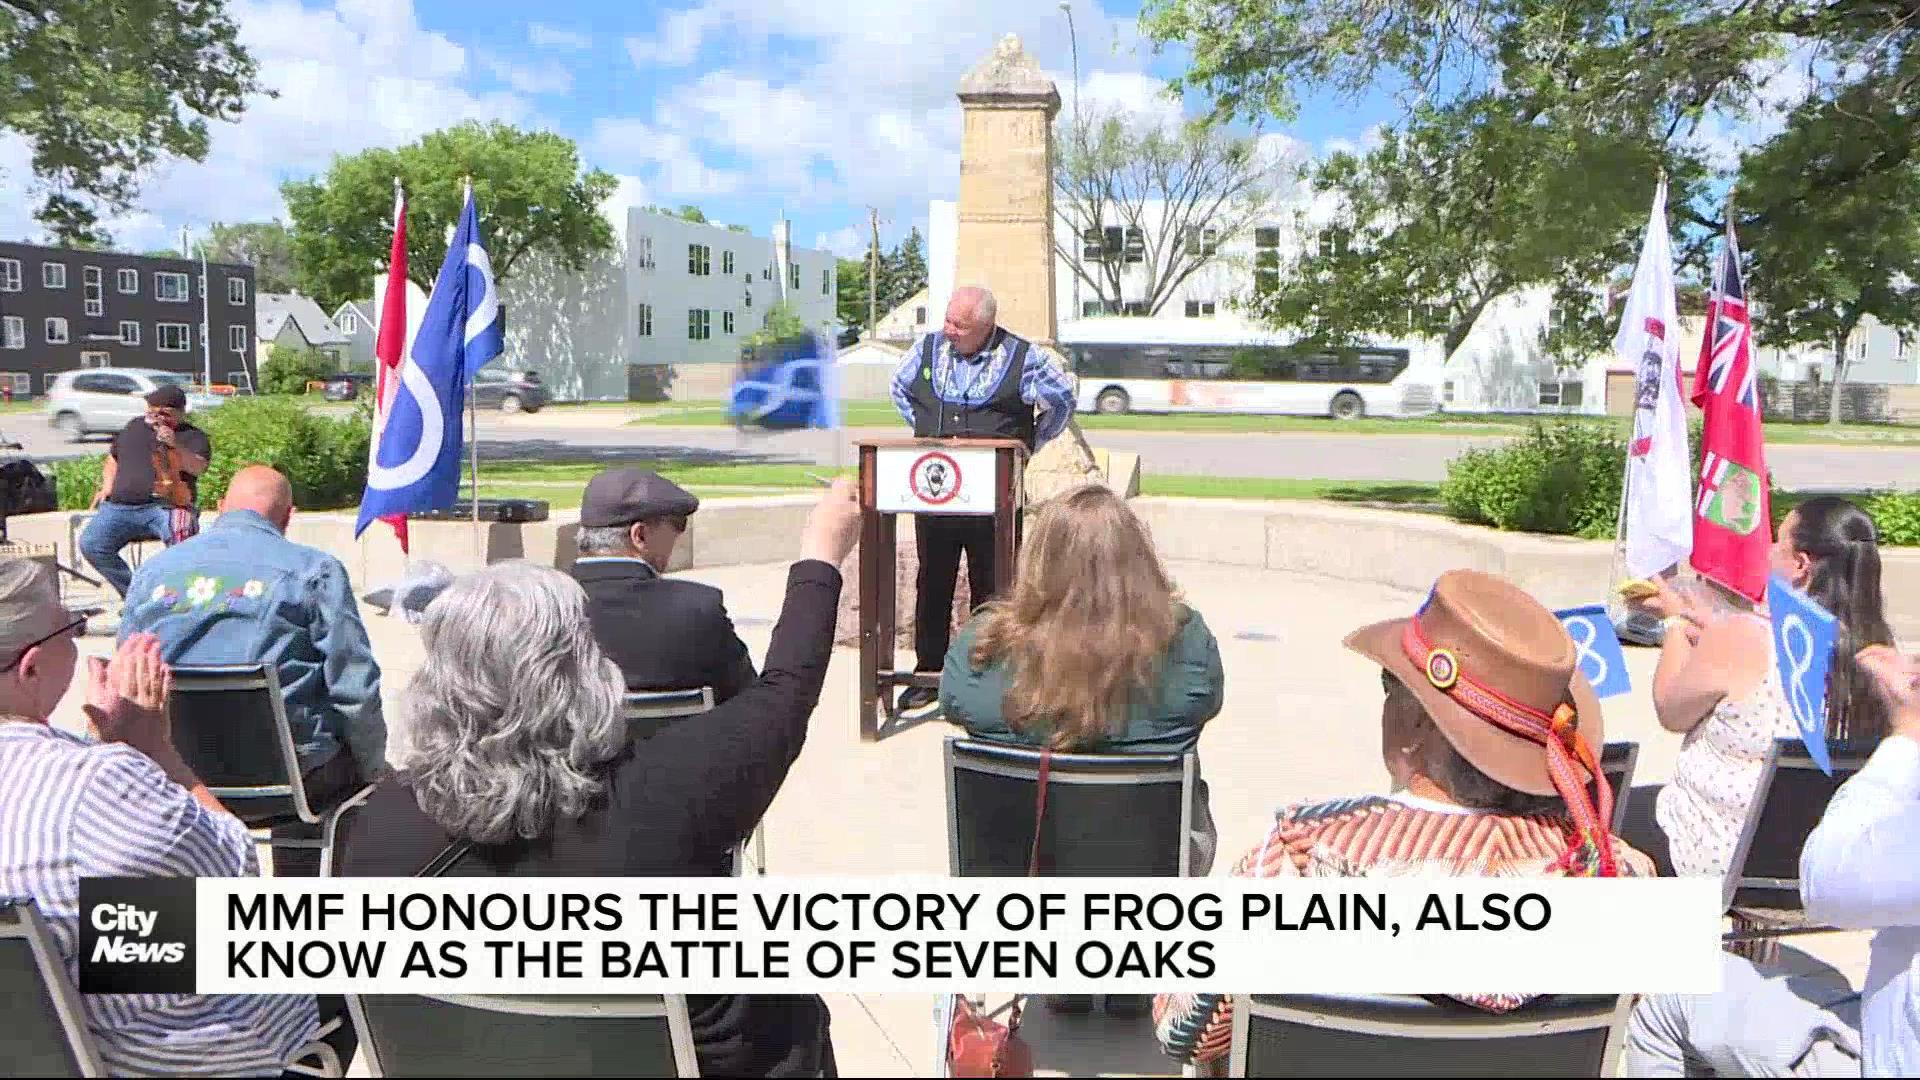 The Manitoba Metis Federation honors the Victory of Frog Plain, also known as the Battle of Seven Oaks